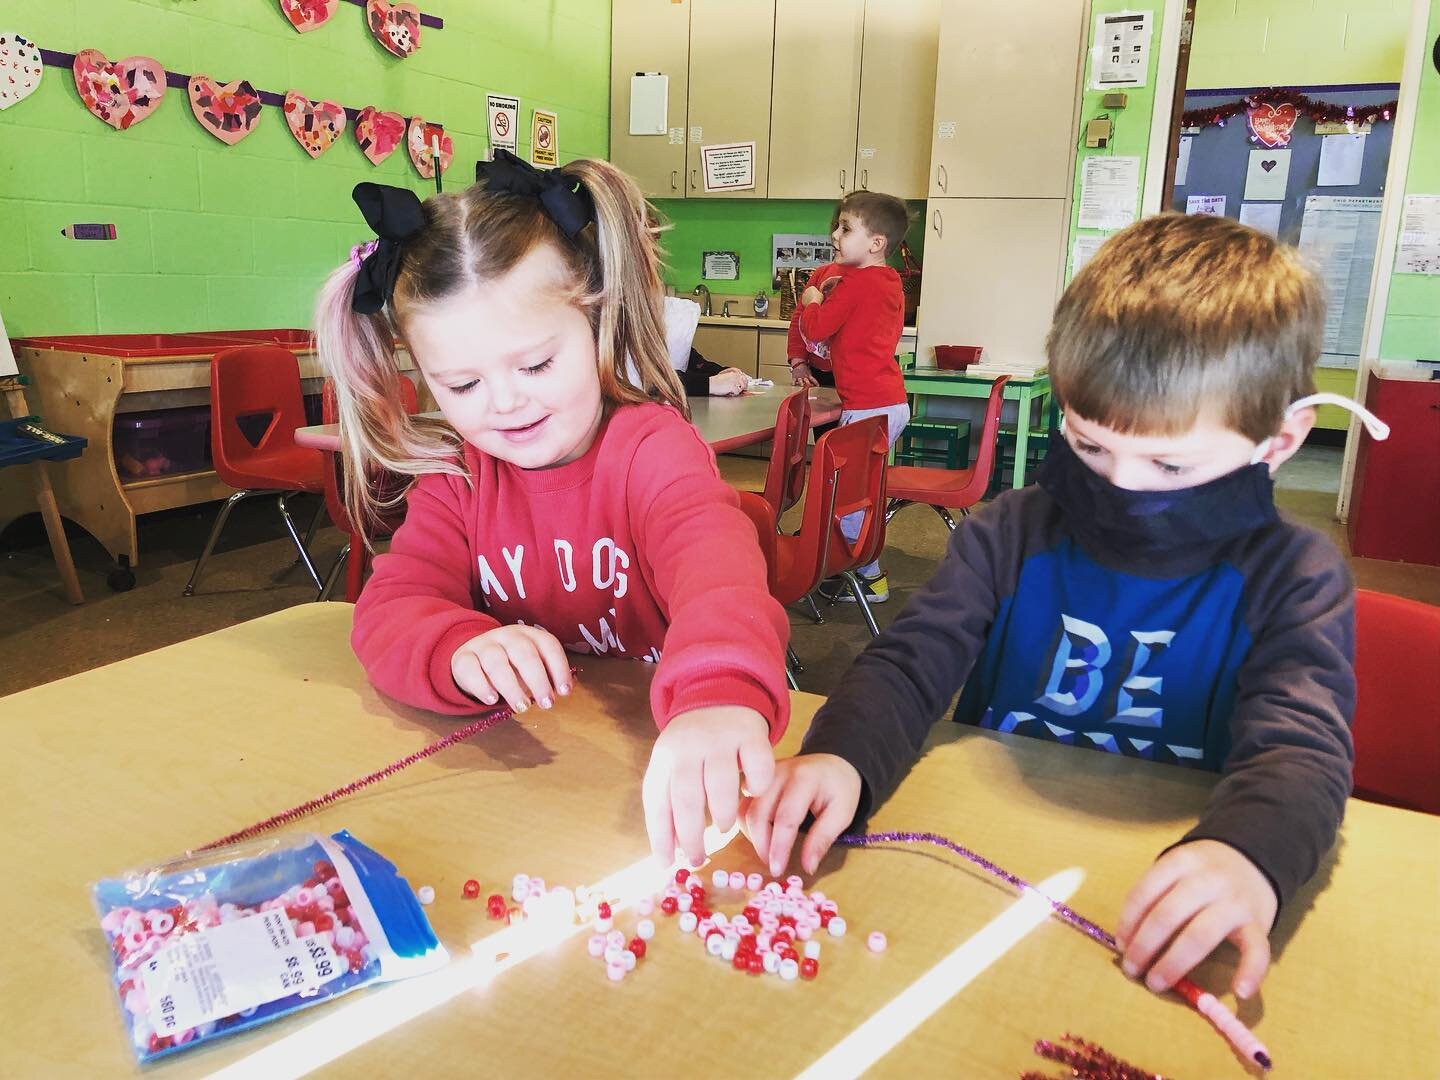 Happy Valentine&rsquo;s Day from the 4&rsquo;s class (and the Loveland Valentine&rsquo;s Lady)!

#valentines #loveland #preschool